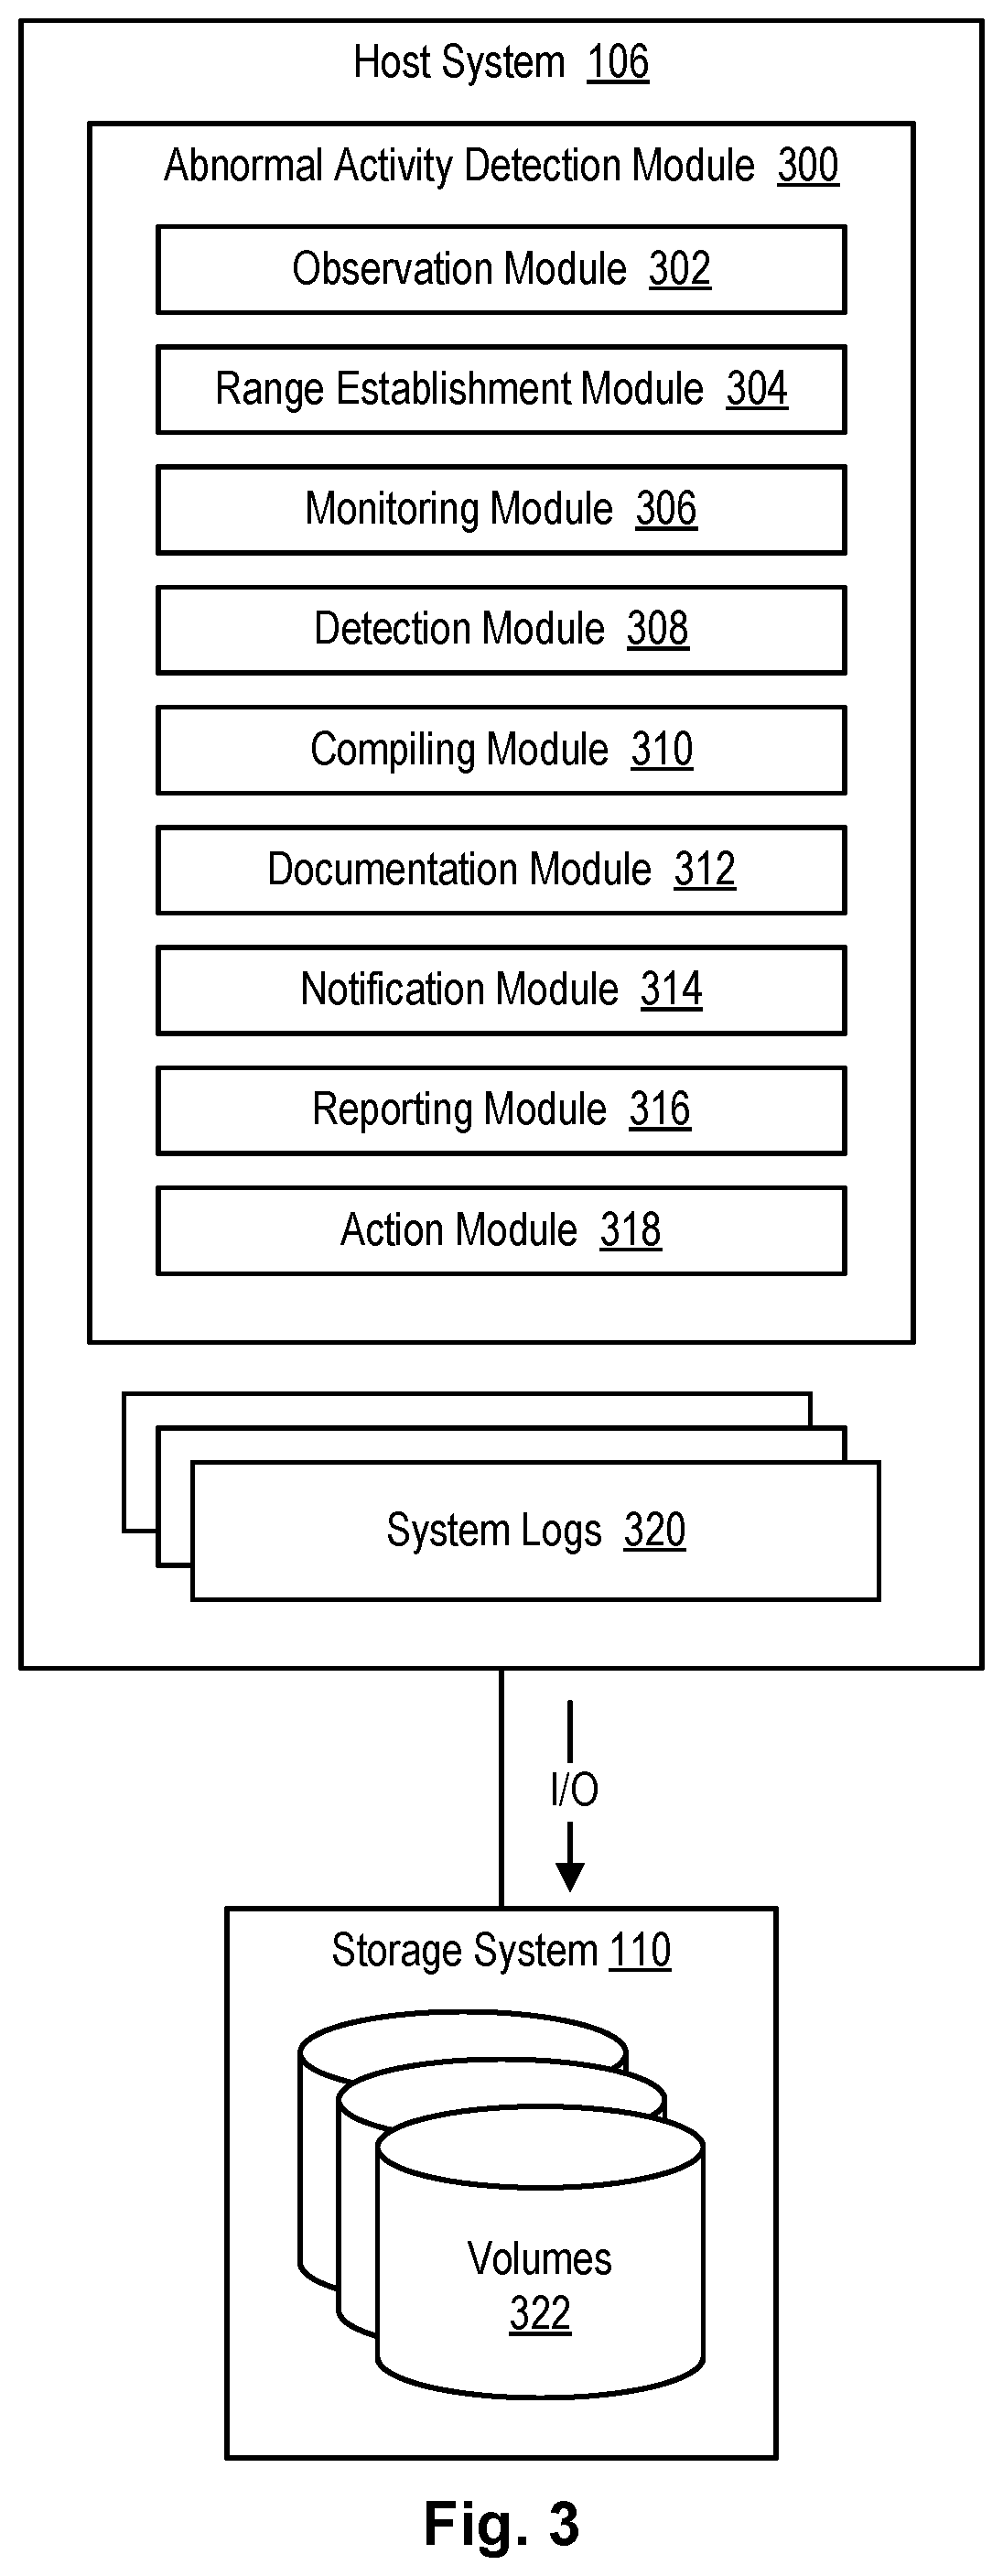 Remote health monitoring in data replication environments